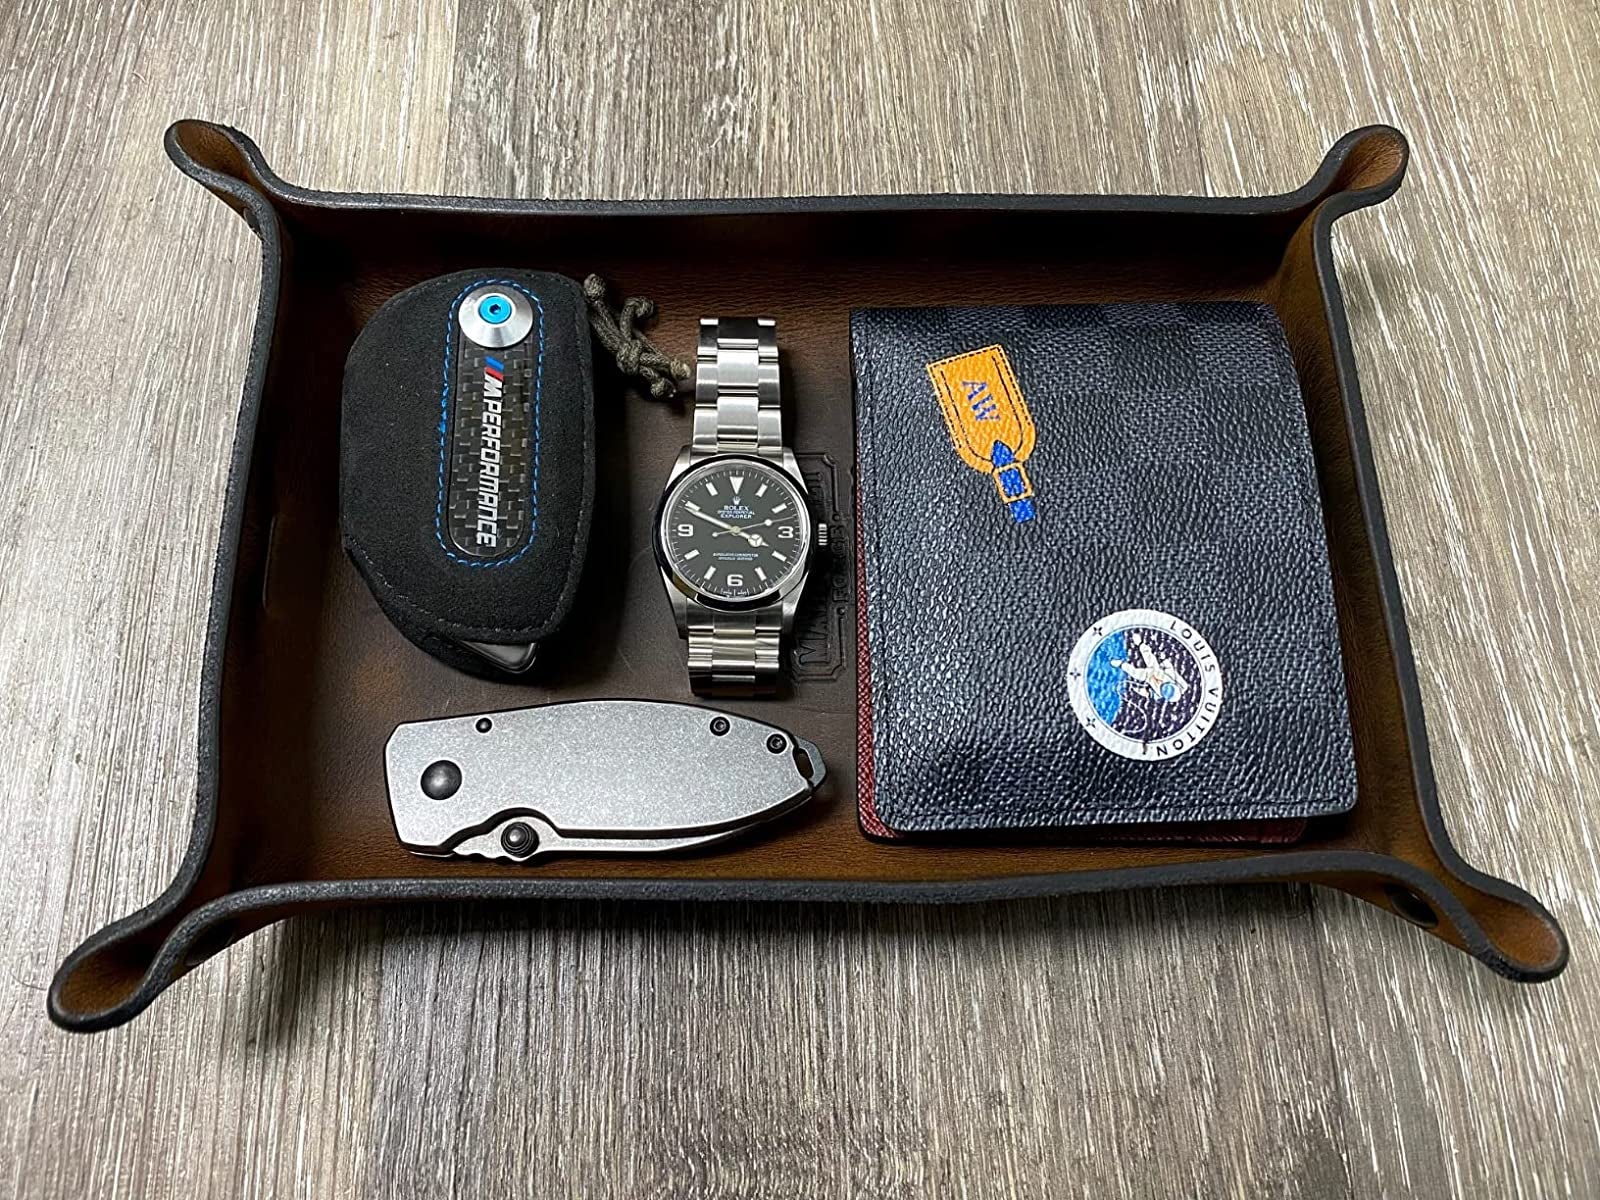 Leather valet tray with wallet, watch, knife and other items inside